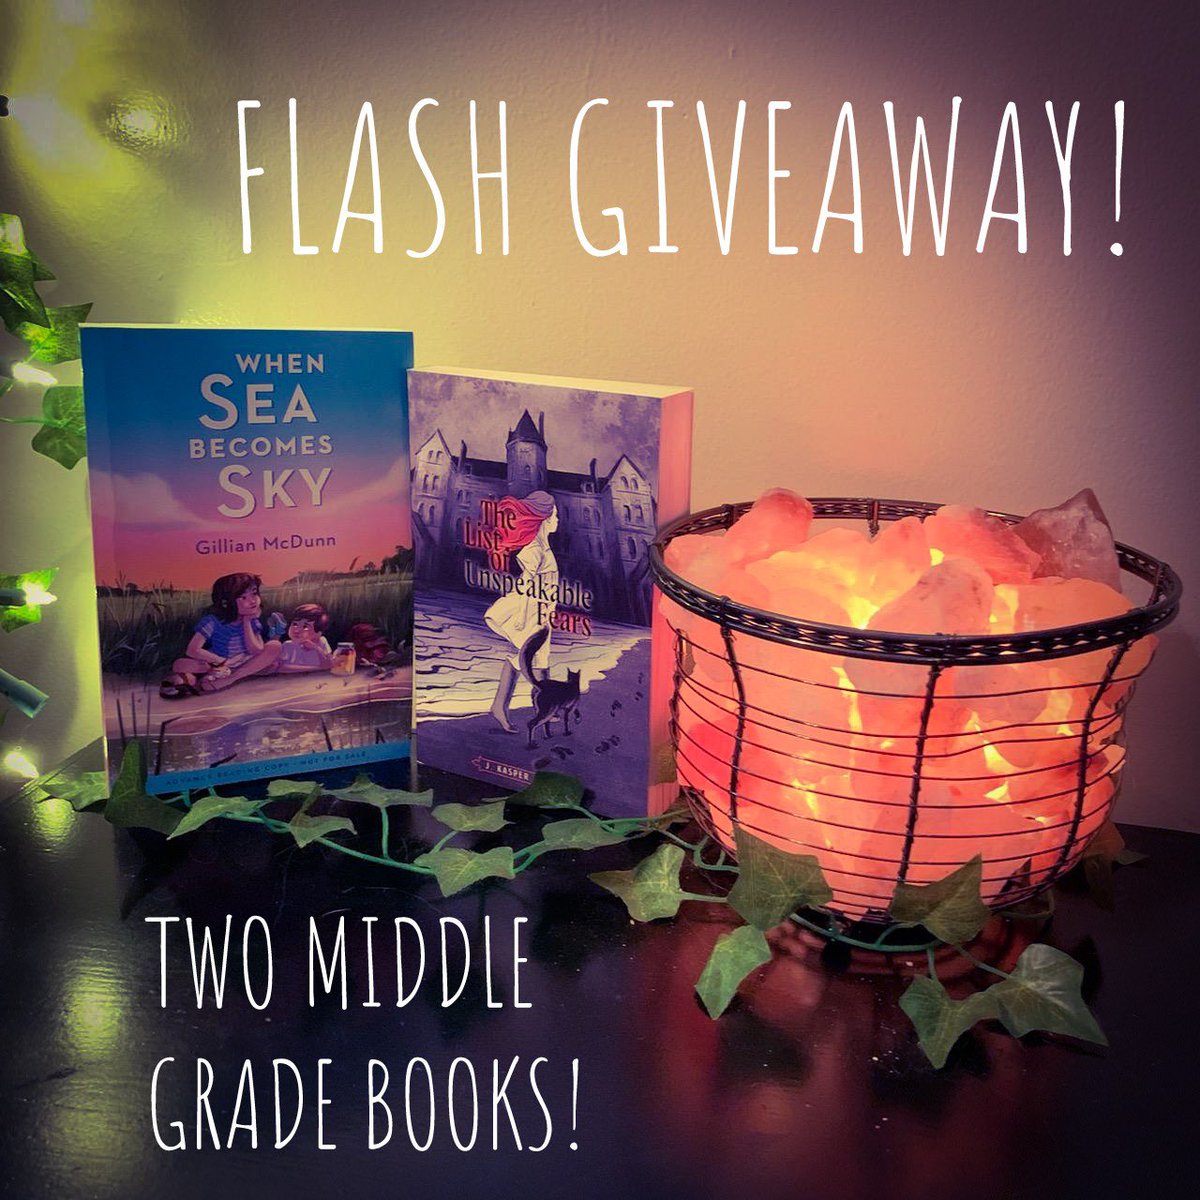 To celebrate the upcoming release of @gillianmcdunn’s beautiful new novel, WHEN SEA BECOMES SKY, head over to my Instagram (same account name ☺️) to enter to win not one but TWO middle grade novels! #Giveaway #kidlit #middlegrade #BookRecommendation